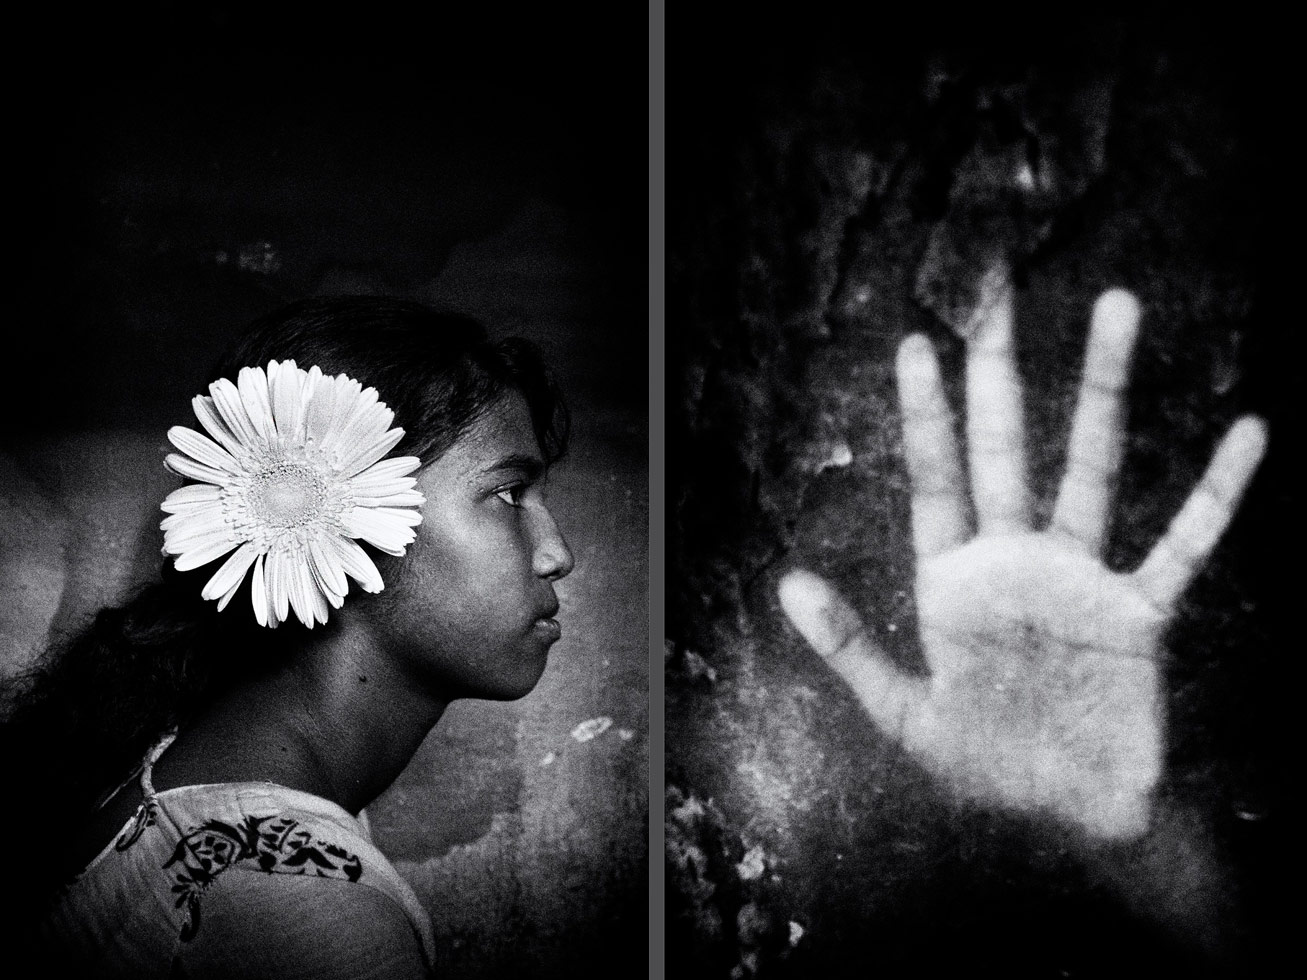 With a healthy dose of compassion, Debiprasad photographs the marginalized. He says his photographic vision is "not only to depict social, political and financial issues and conflicts but also to portray surreal beauty and the enduring power of the human spirit." These diptychs make for an interesting way of seeing the children and their environments.